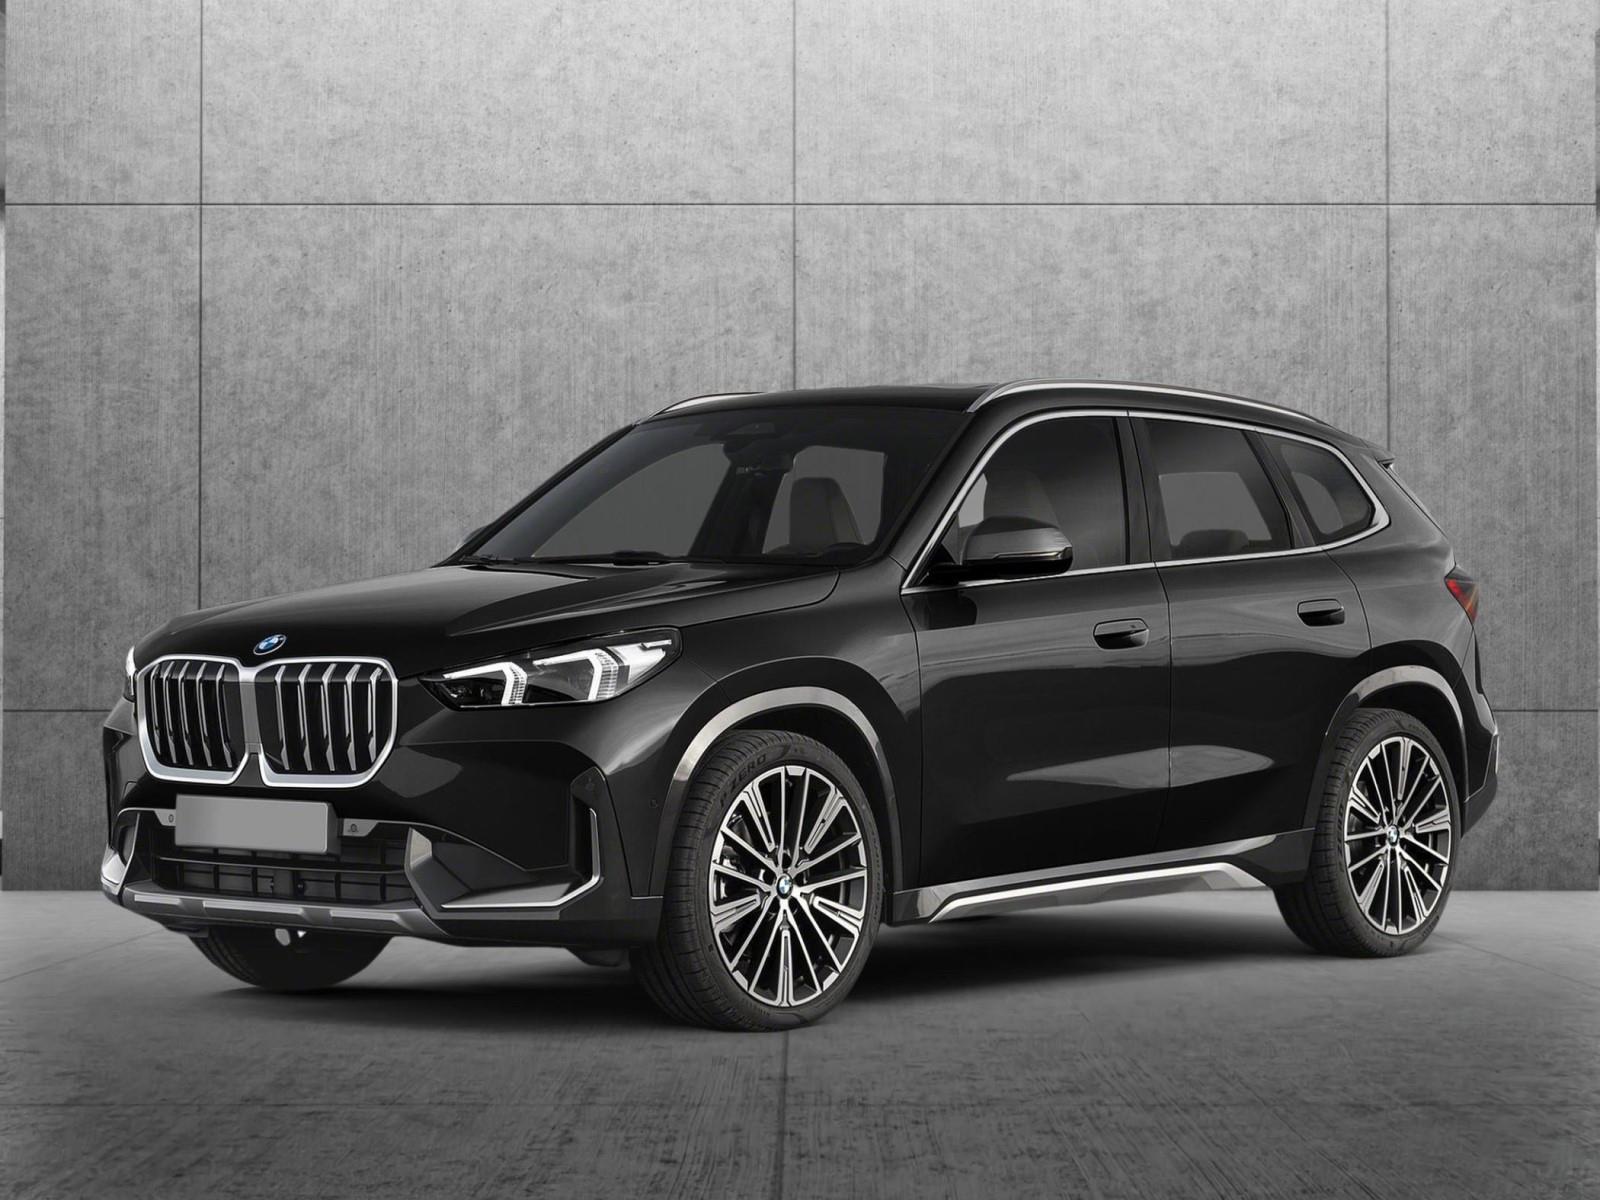 NEW 2023 BMW X1 for sale in Buena Park, CA 90621 - AutoNation